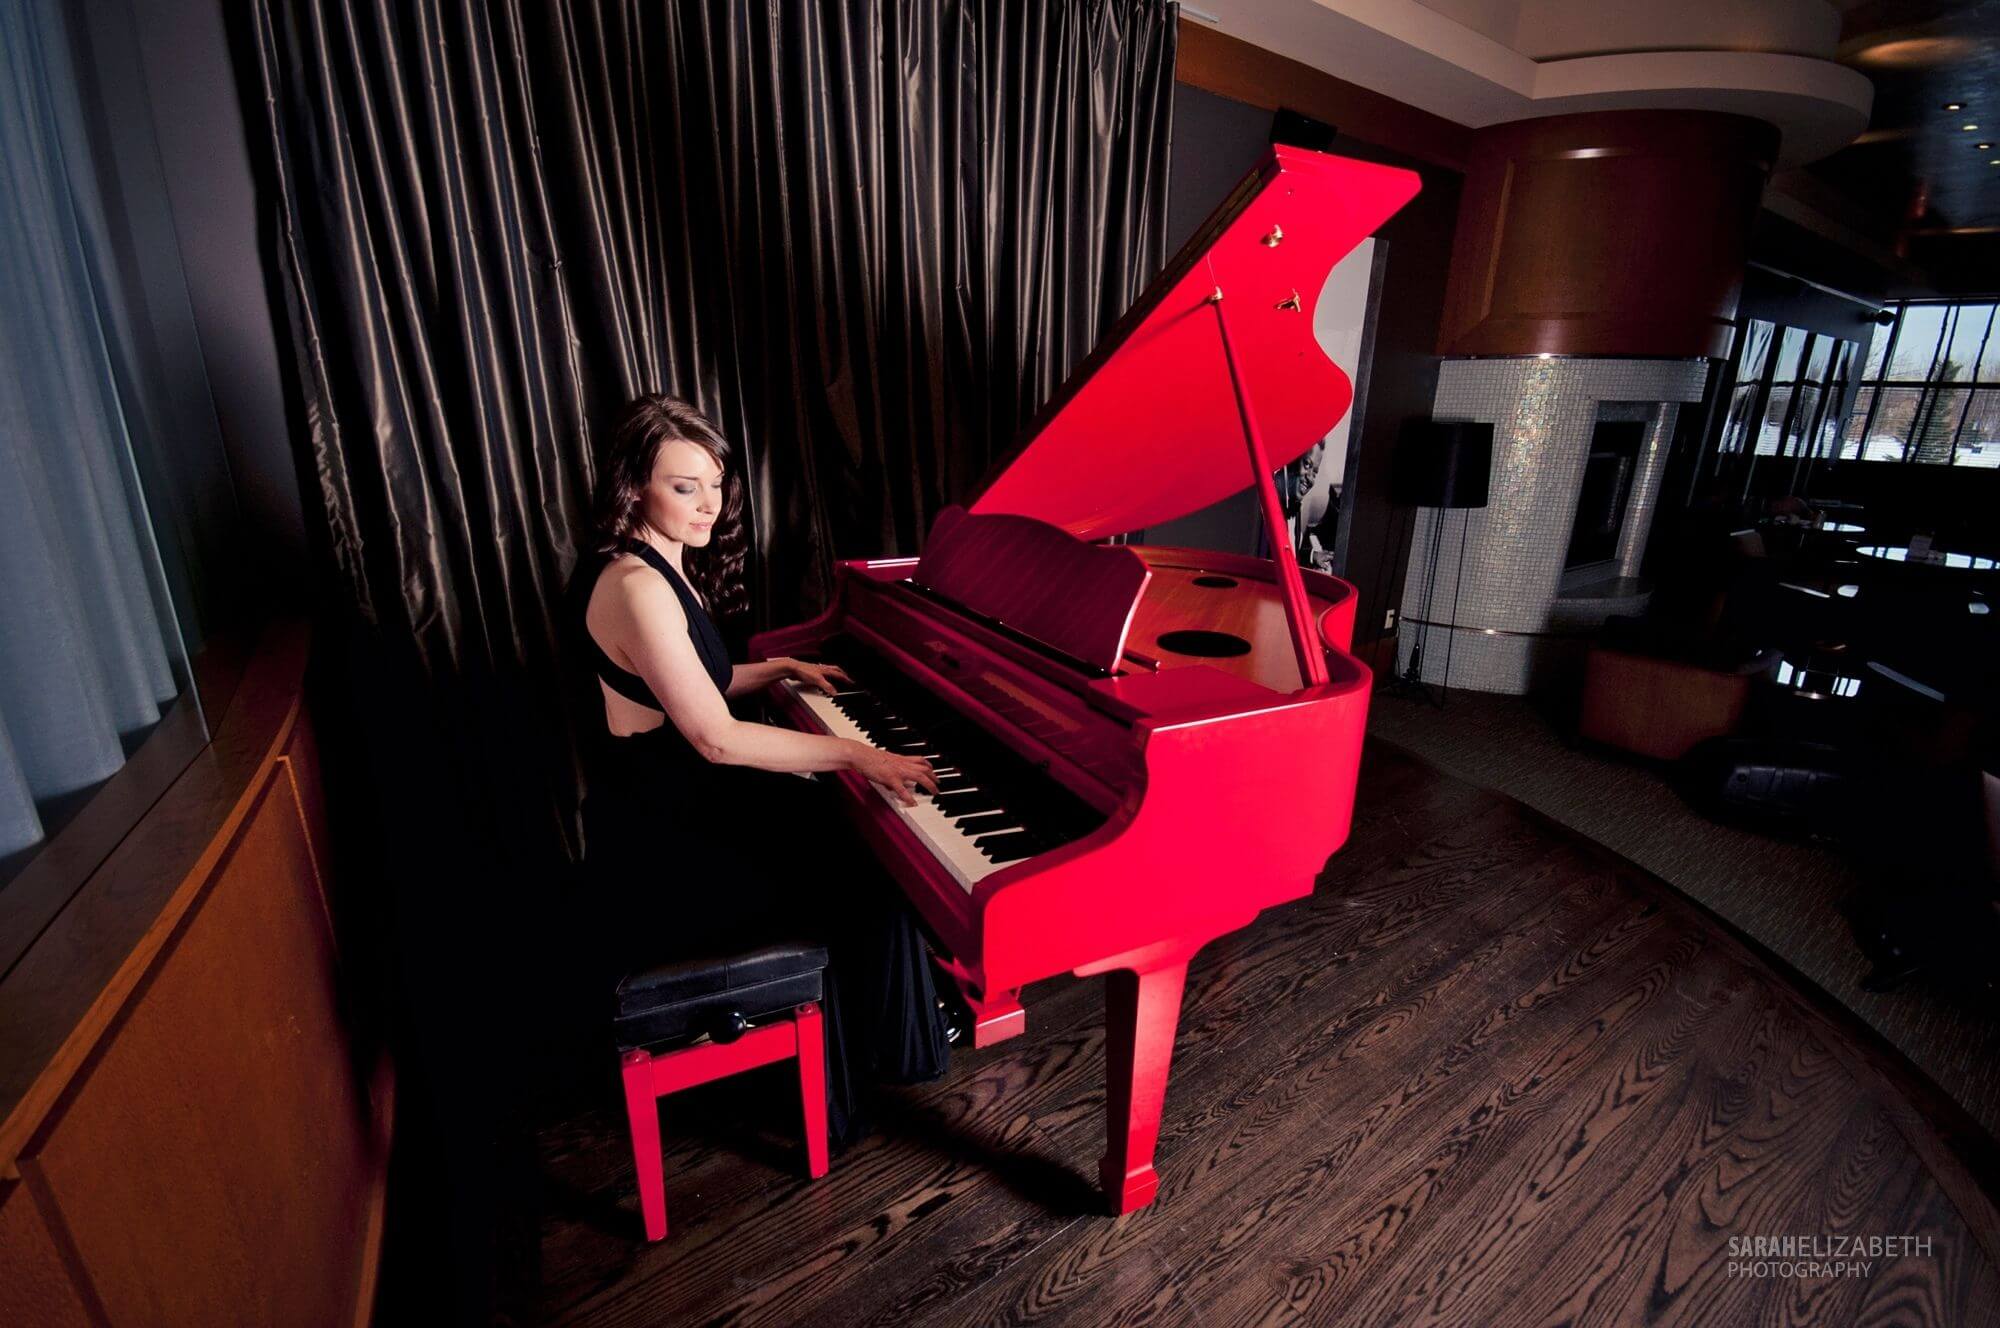 Kimberley Dunn performing at Brookstreet Options Lounge Red Piano